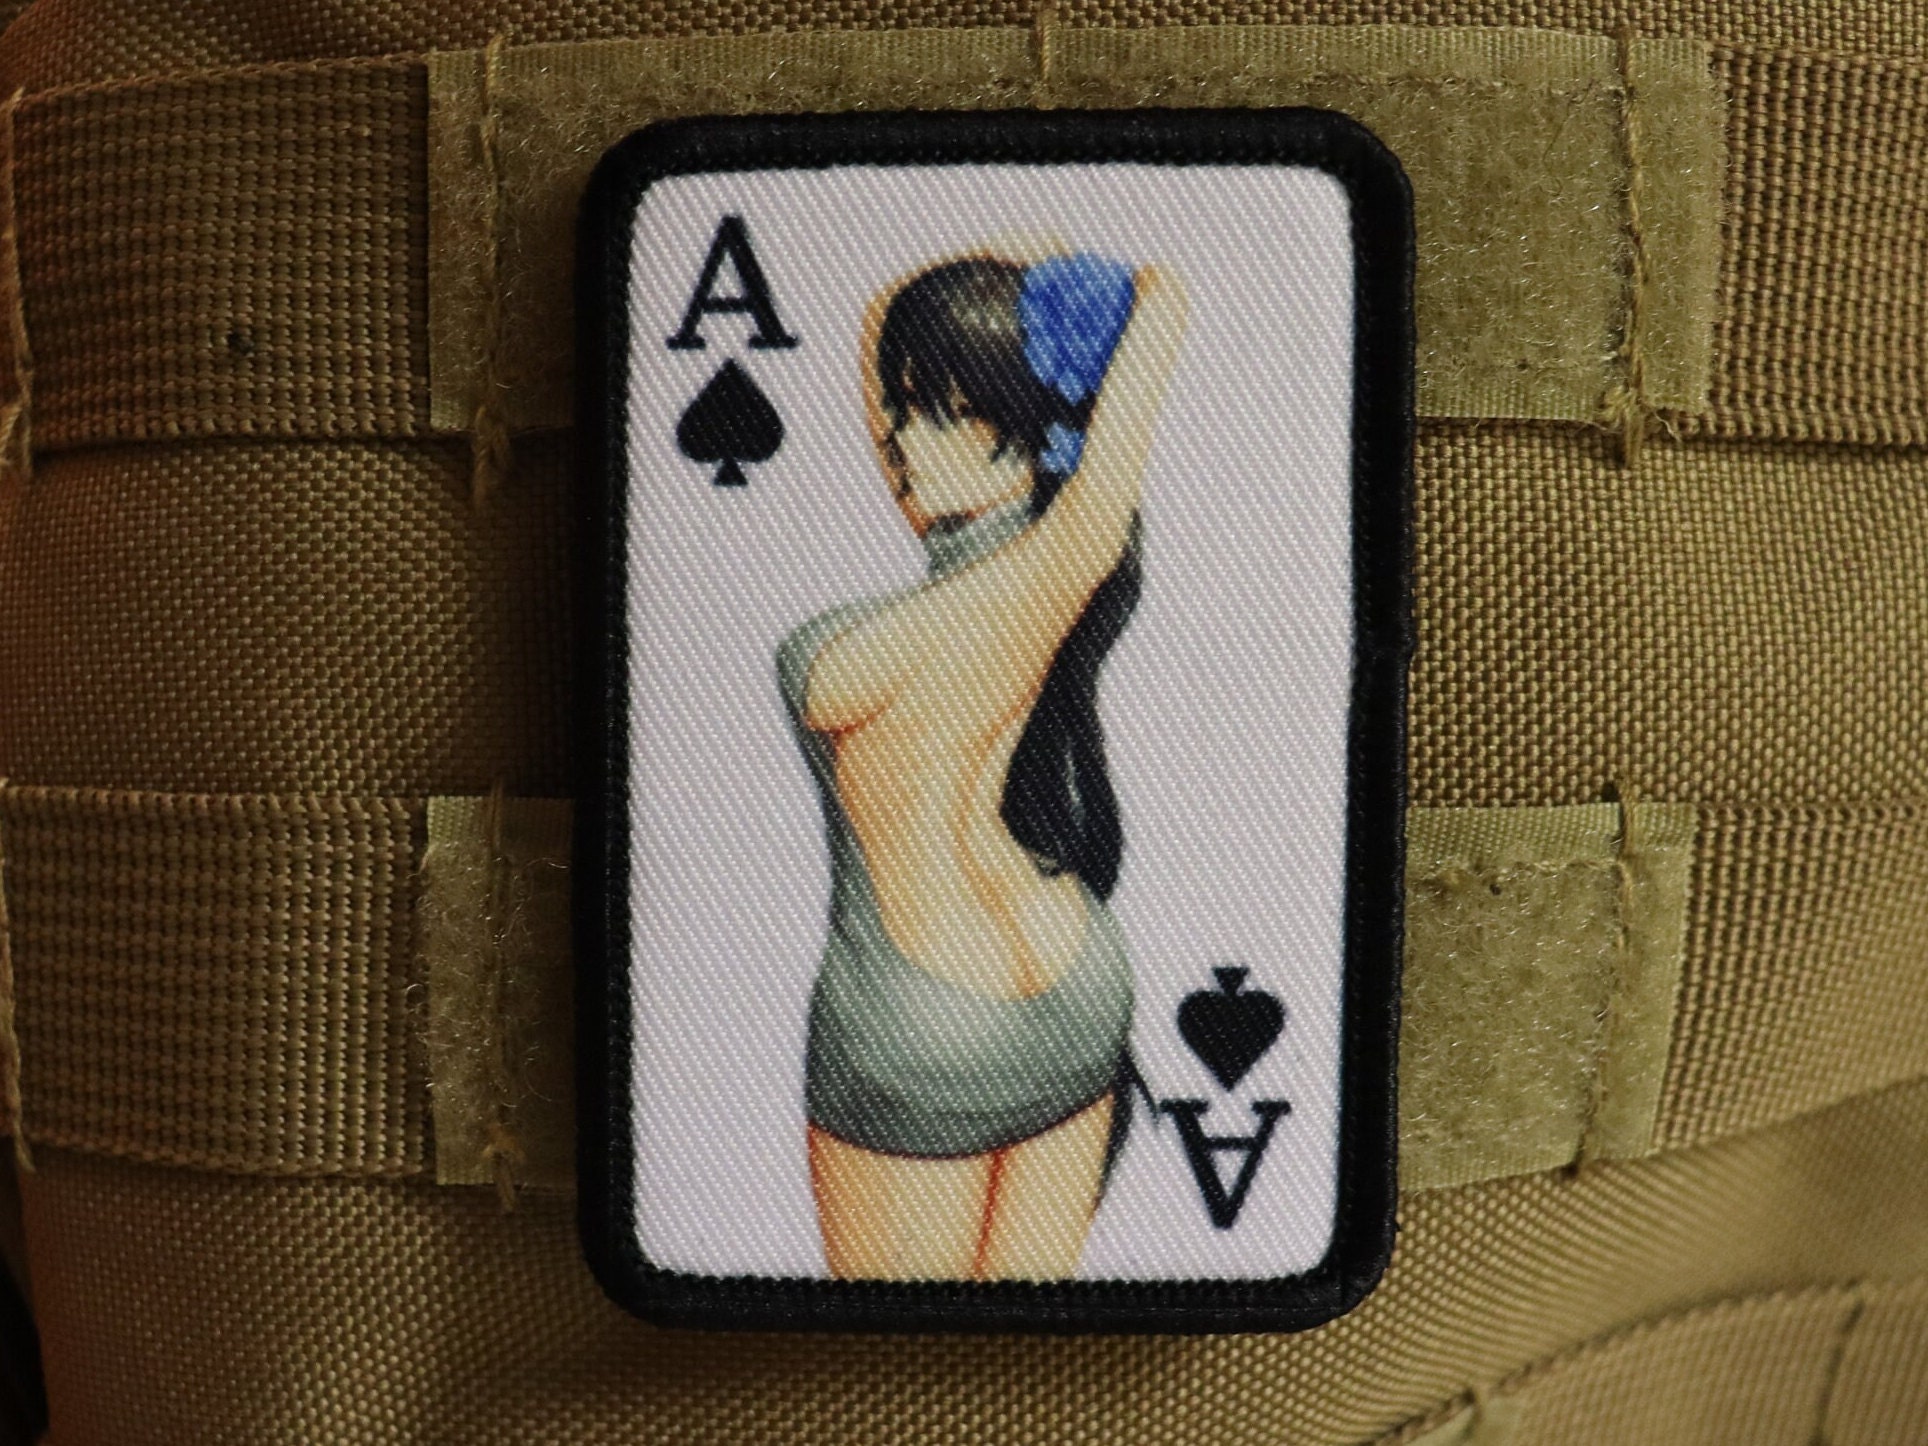 Ahegao Face Meme Anime Sexy O Face 2x3 Removable Morale Patch With